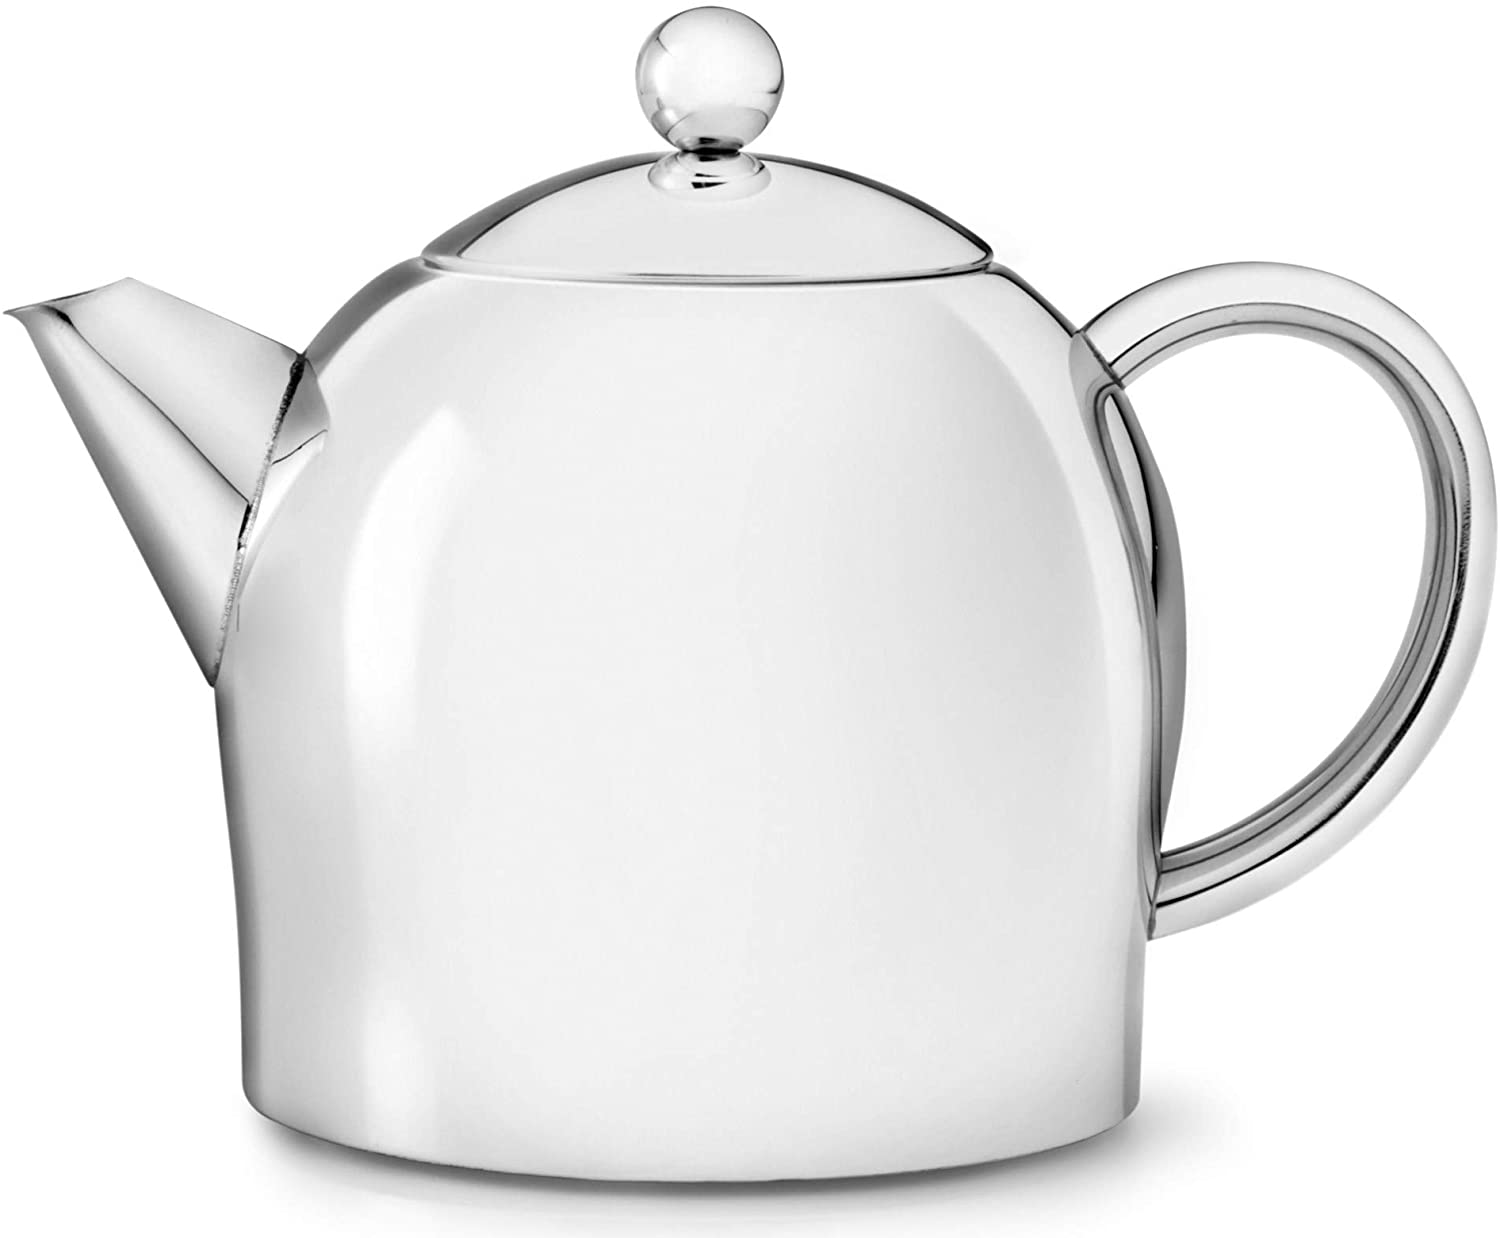 Bredemeijer Minuet Santhee 5304MS Teapot Double-Walled 0.5 Litres Stainless Steel with High-Gloss Polish